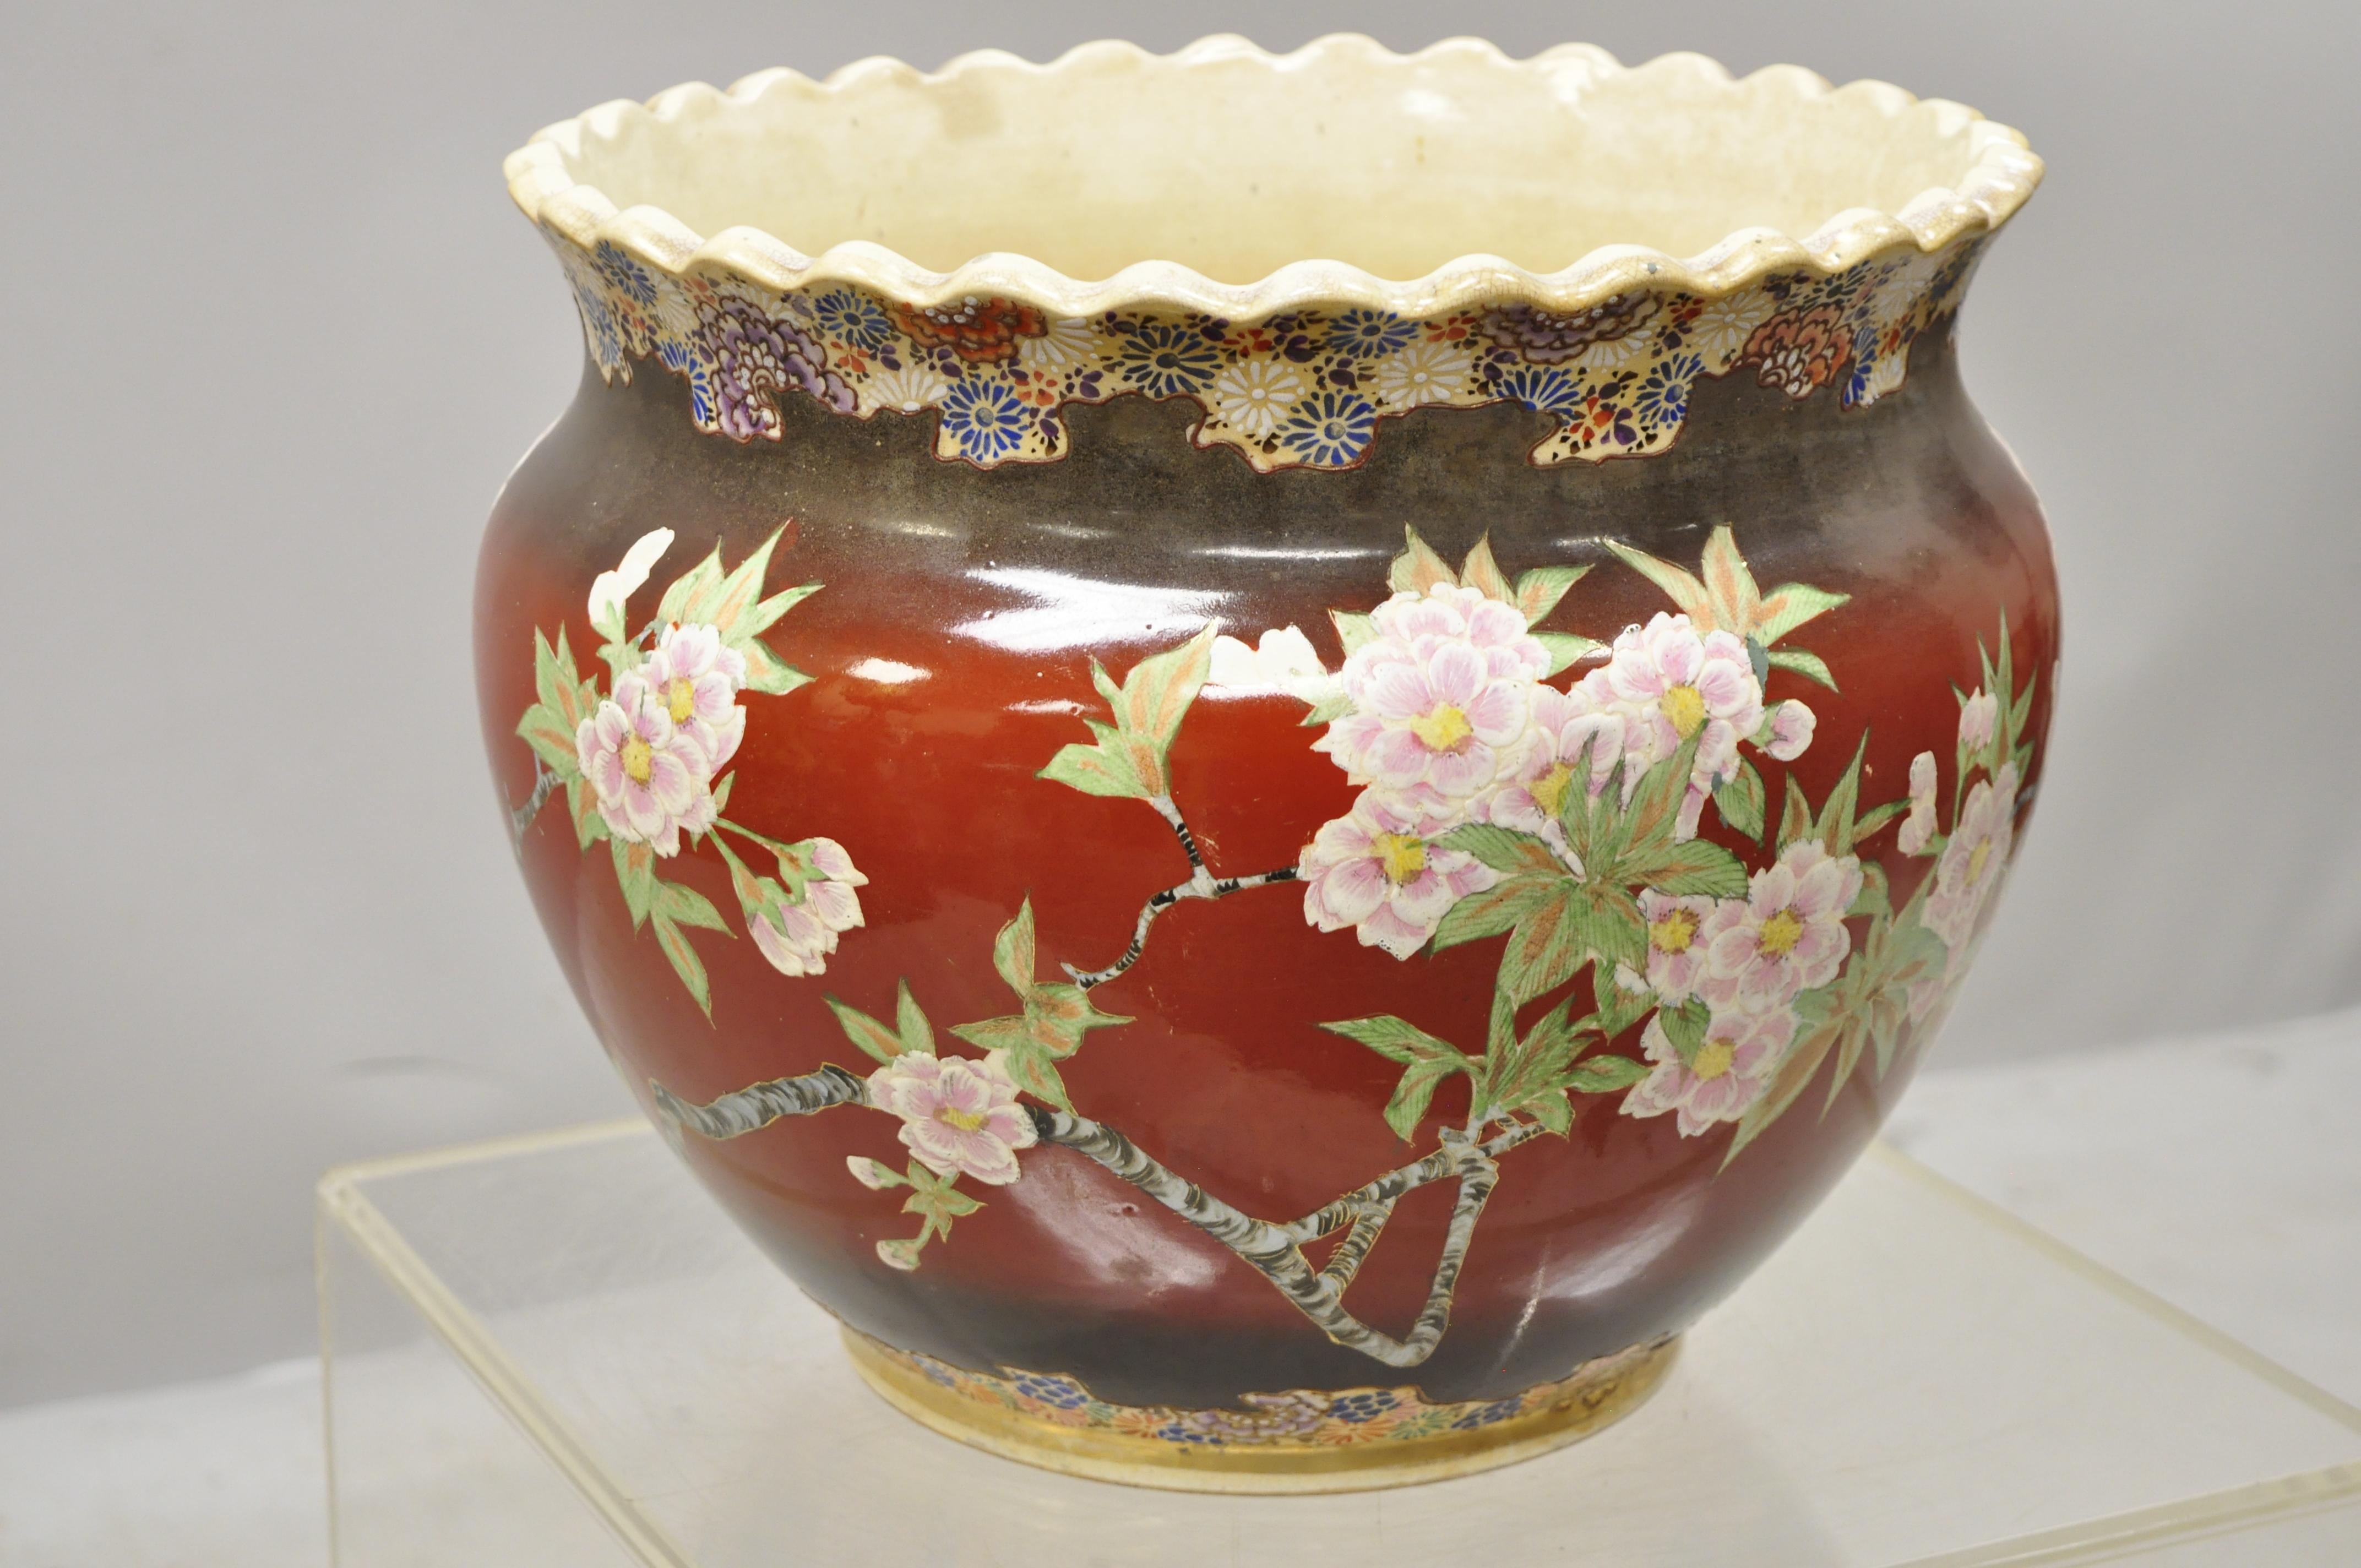 Chinese import pink Famille rose medallion bulbous jardinière planter vase. Item features hand painted flowers, shaped/scalloped rim, bulbous form, very nice antique item, circa early 20th century. Measurements: 12